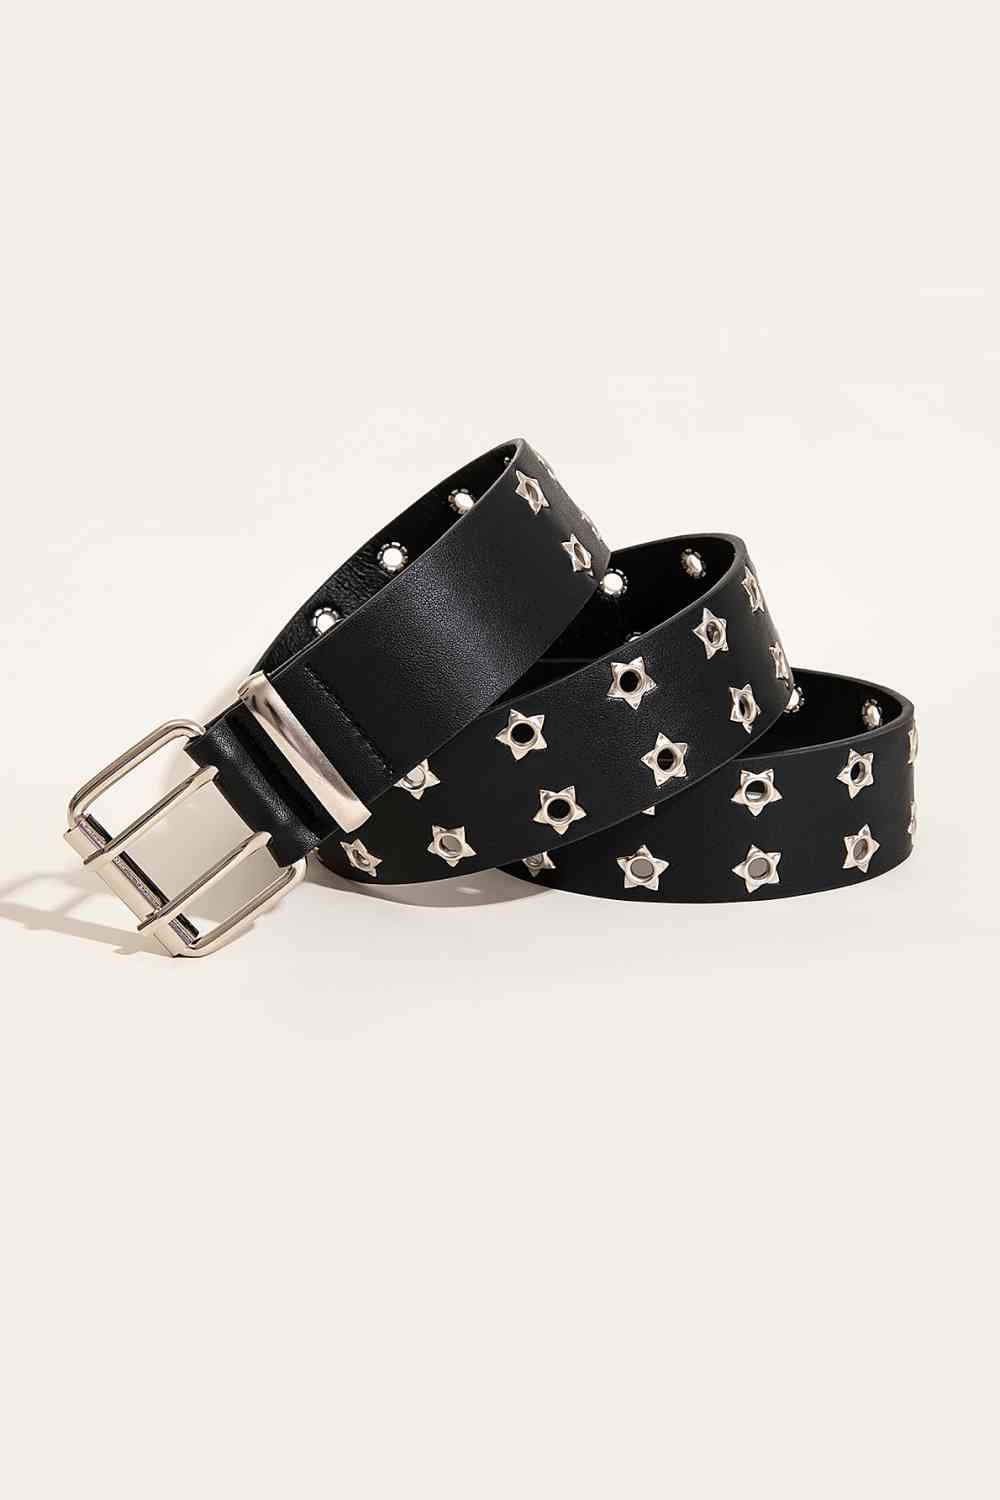 White Smoke Double Row Star Grommet PU Leather Belt Sentient Beauty Fashions Apparel & Accessories